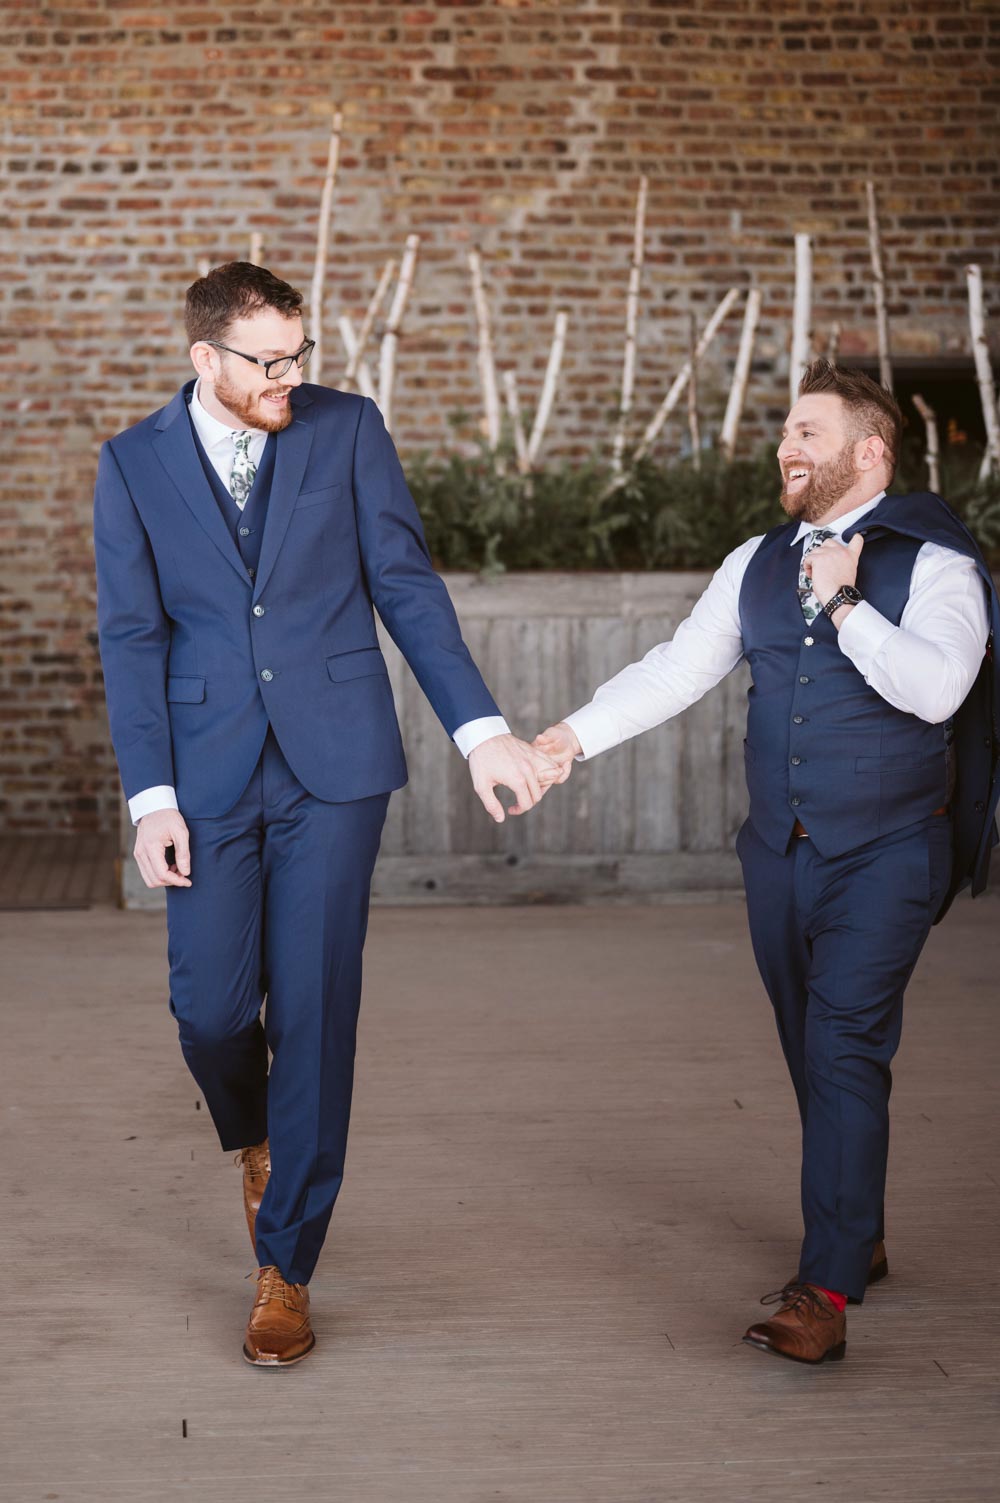 two grooms blue suits David + Andrew: Midwestern Pride Wedding Giveaway winners marry Photo Glass & Grain Photography published on Equally Wed